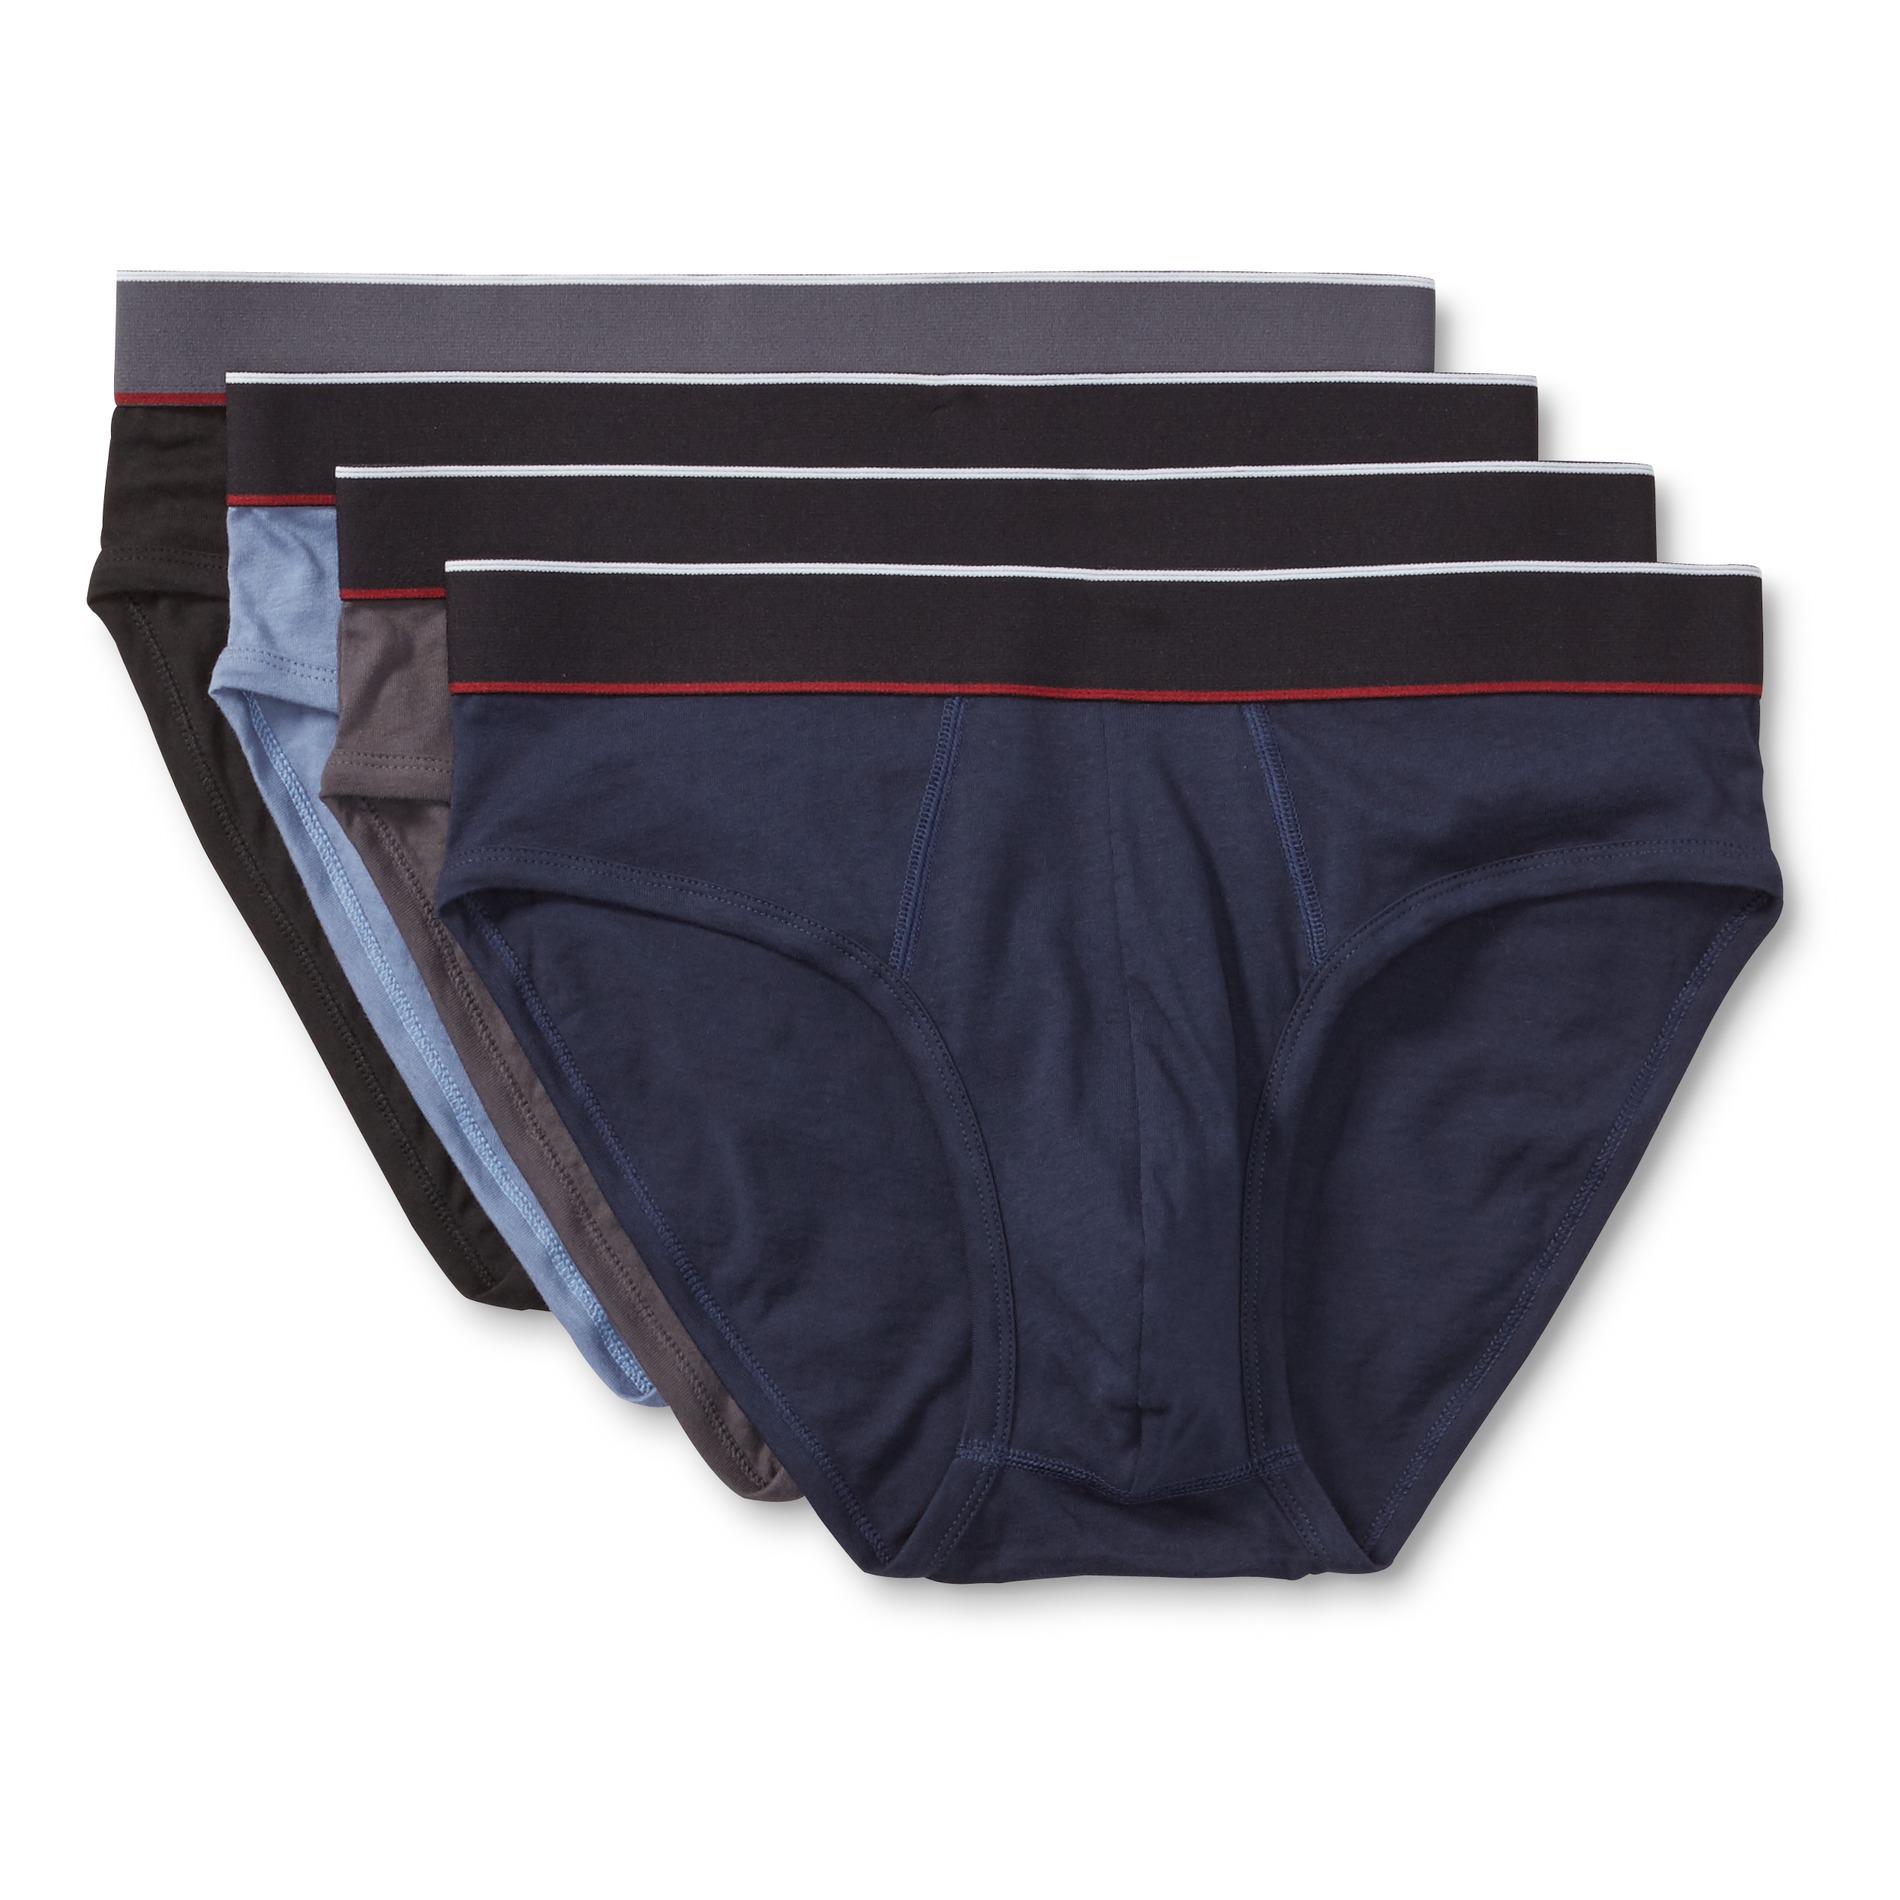 Simply Styled Men's 4-Pack Sport Briefs